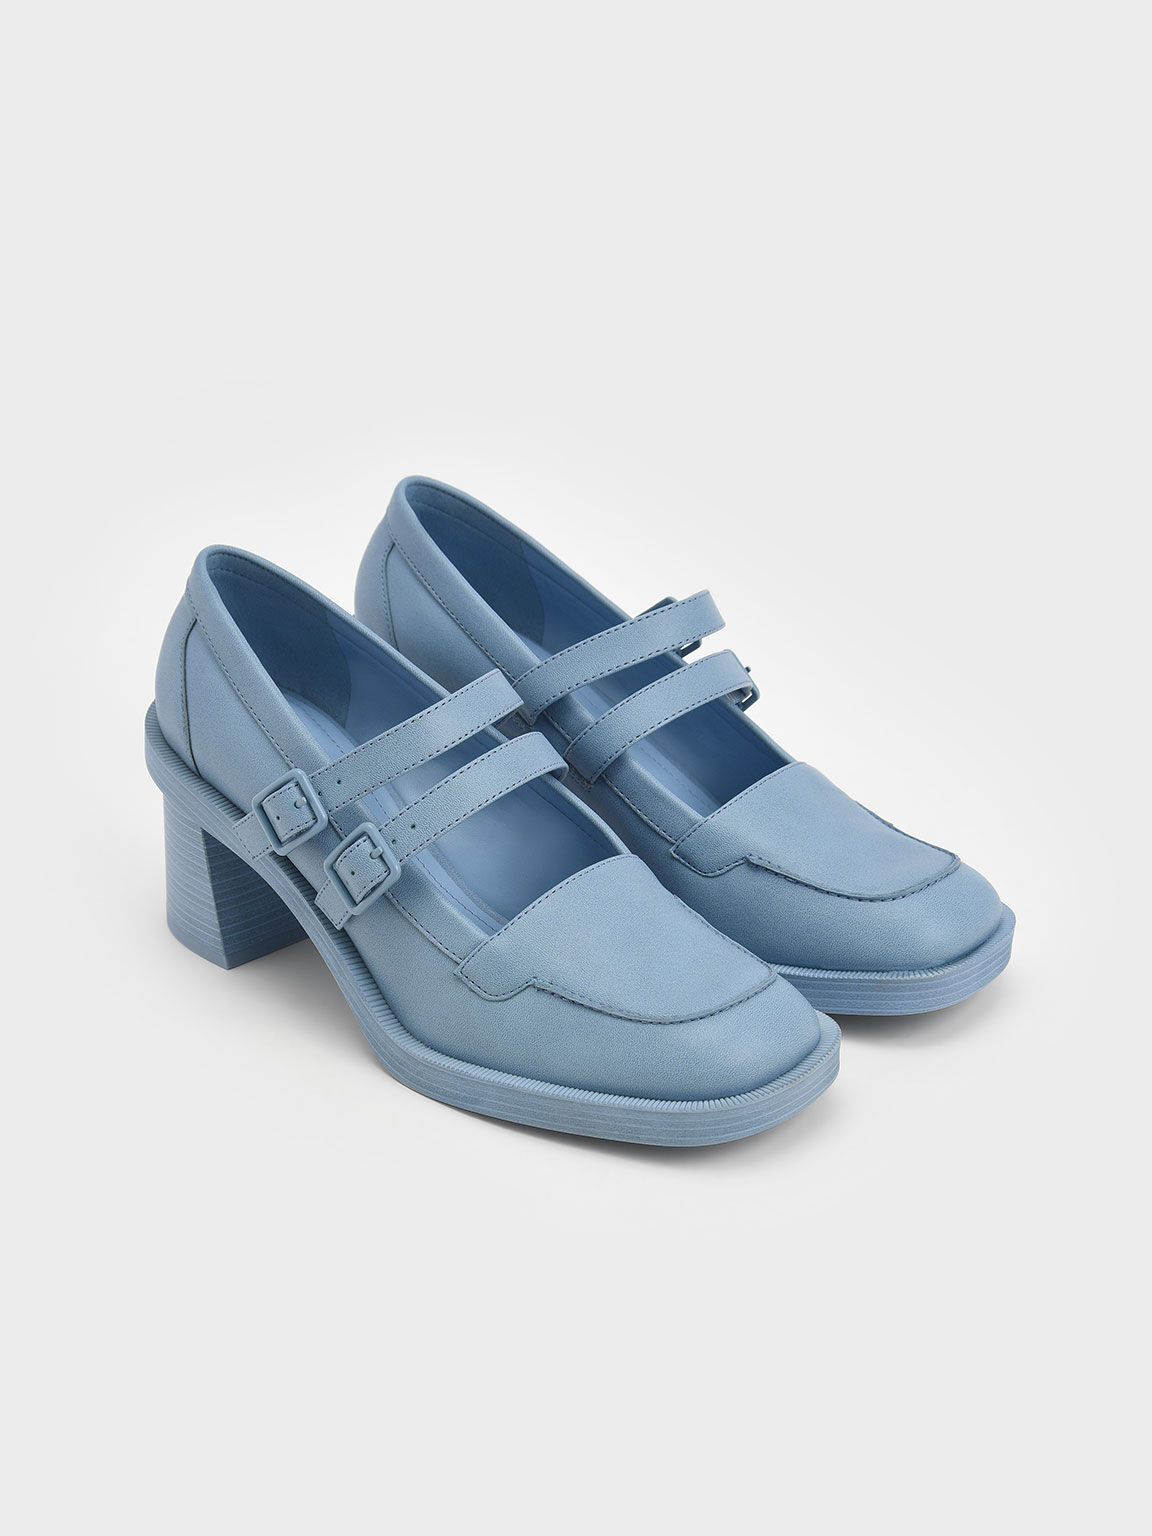 Haisley Double-Strap Mary Jane Pumps, Blue, hi-res